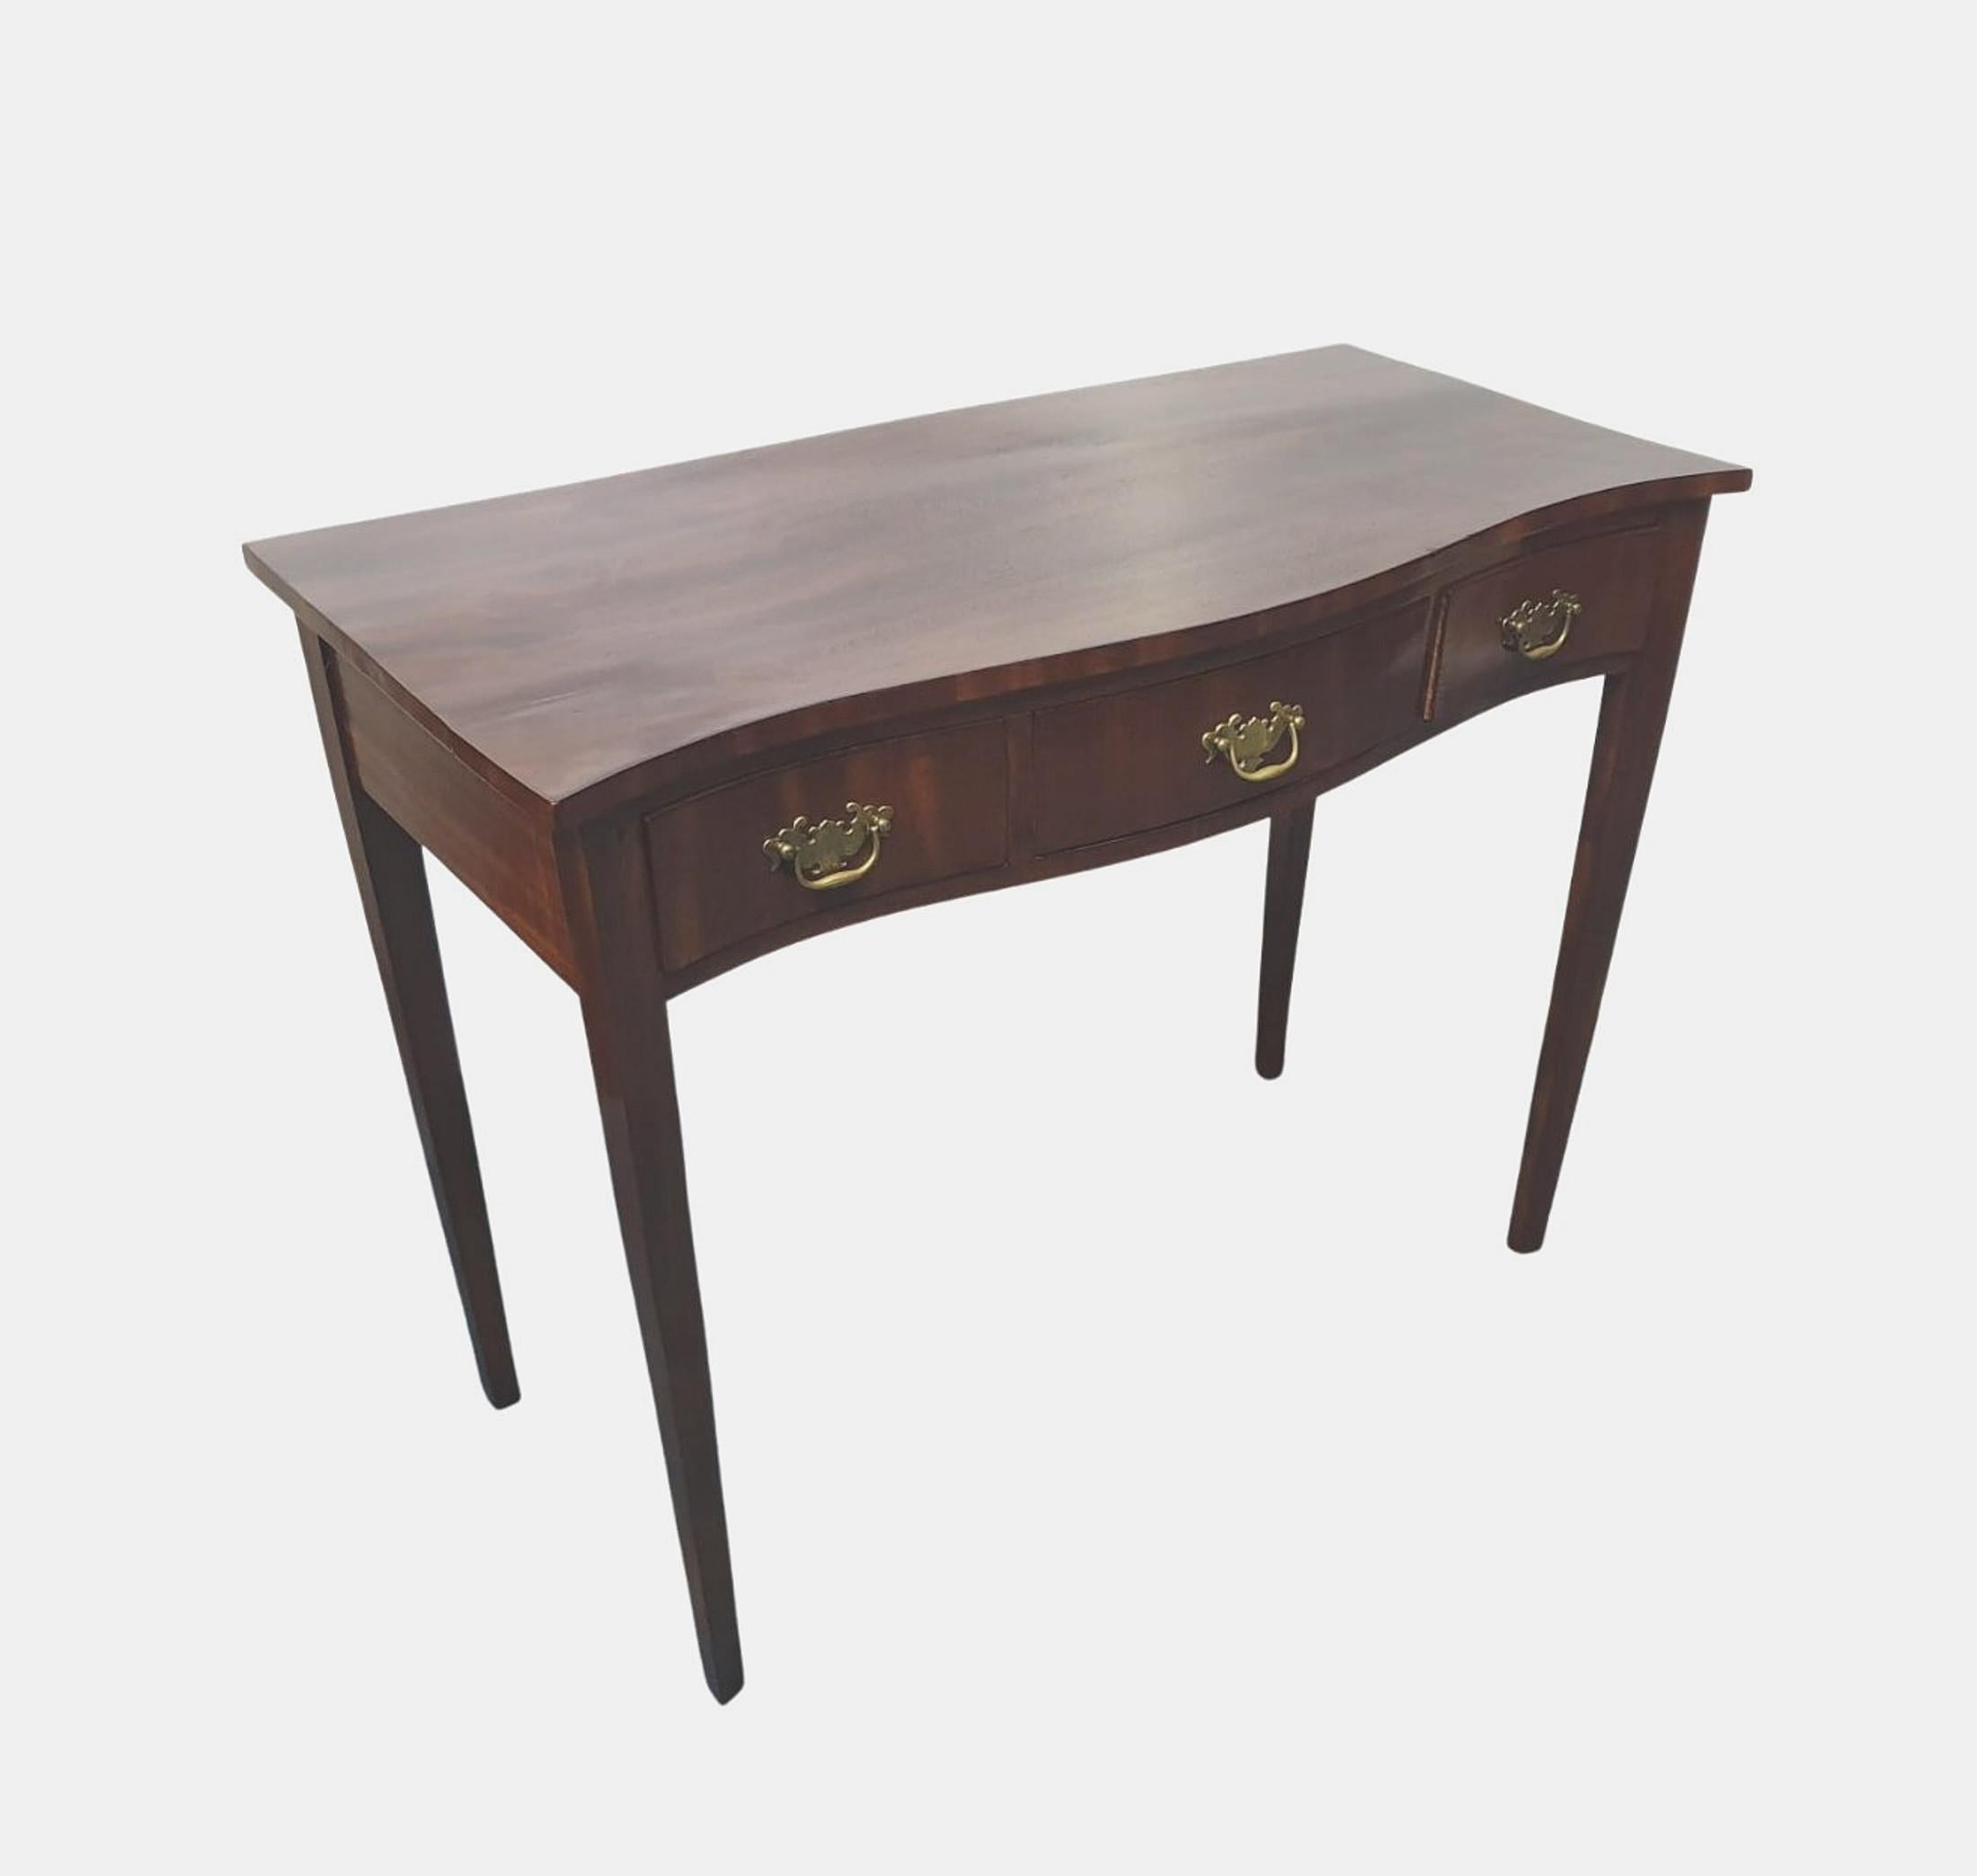 Early 20th century Edwardian mahogany side or hall table in the Georgian style, the moulded serpentine shaped front with moulded top above frieze with three drawers with decorative brass ring pulls supported on tapering square leg. 

Fully